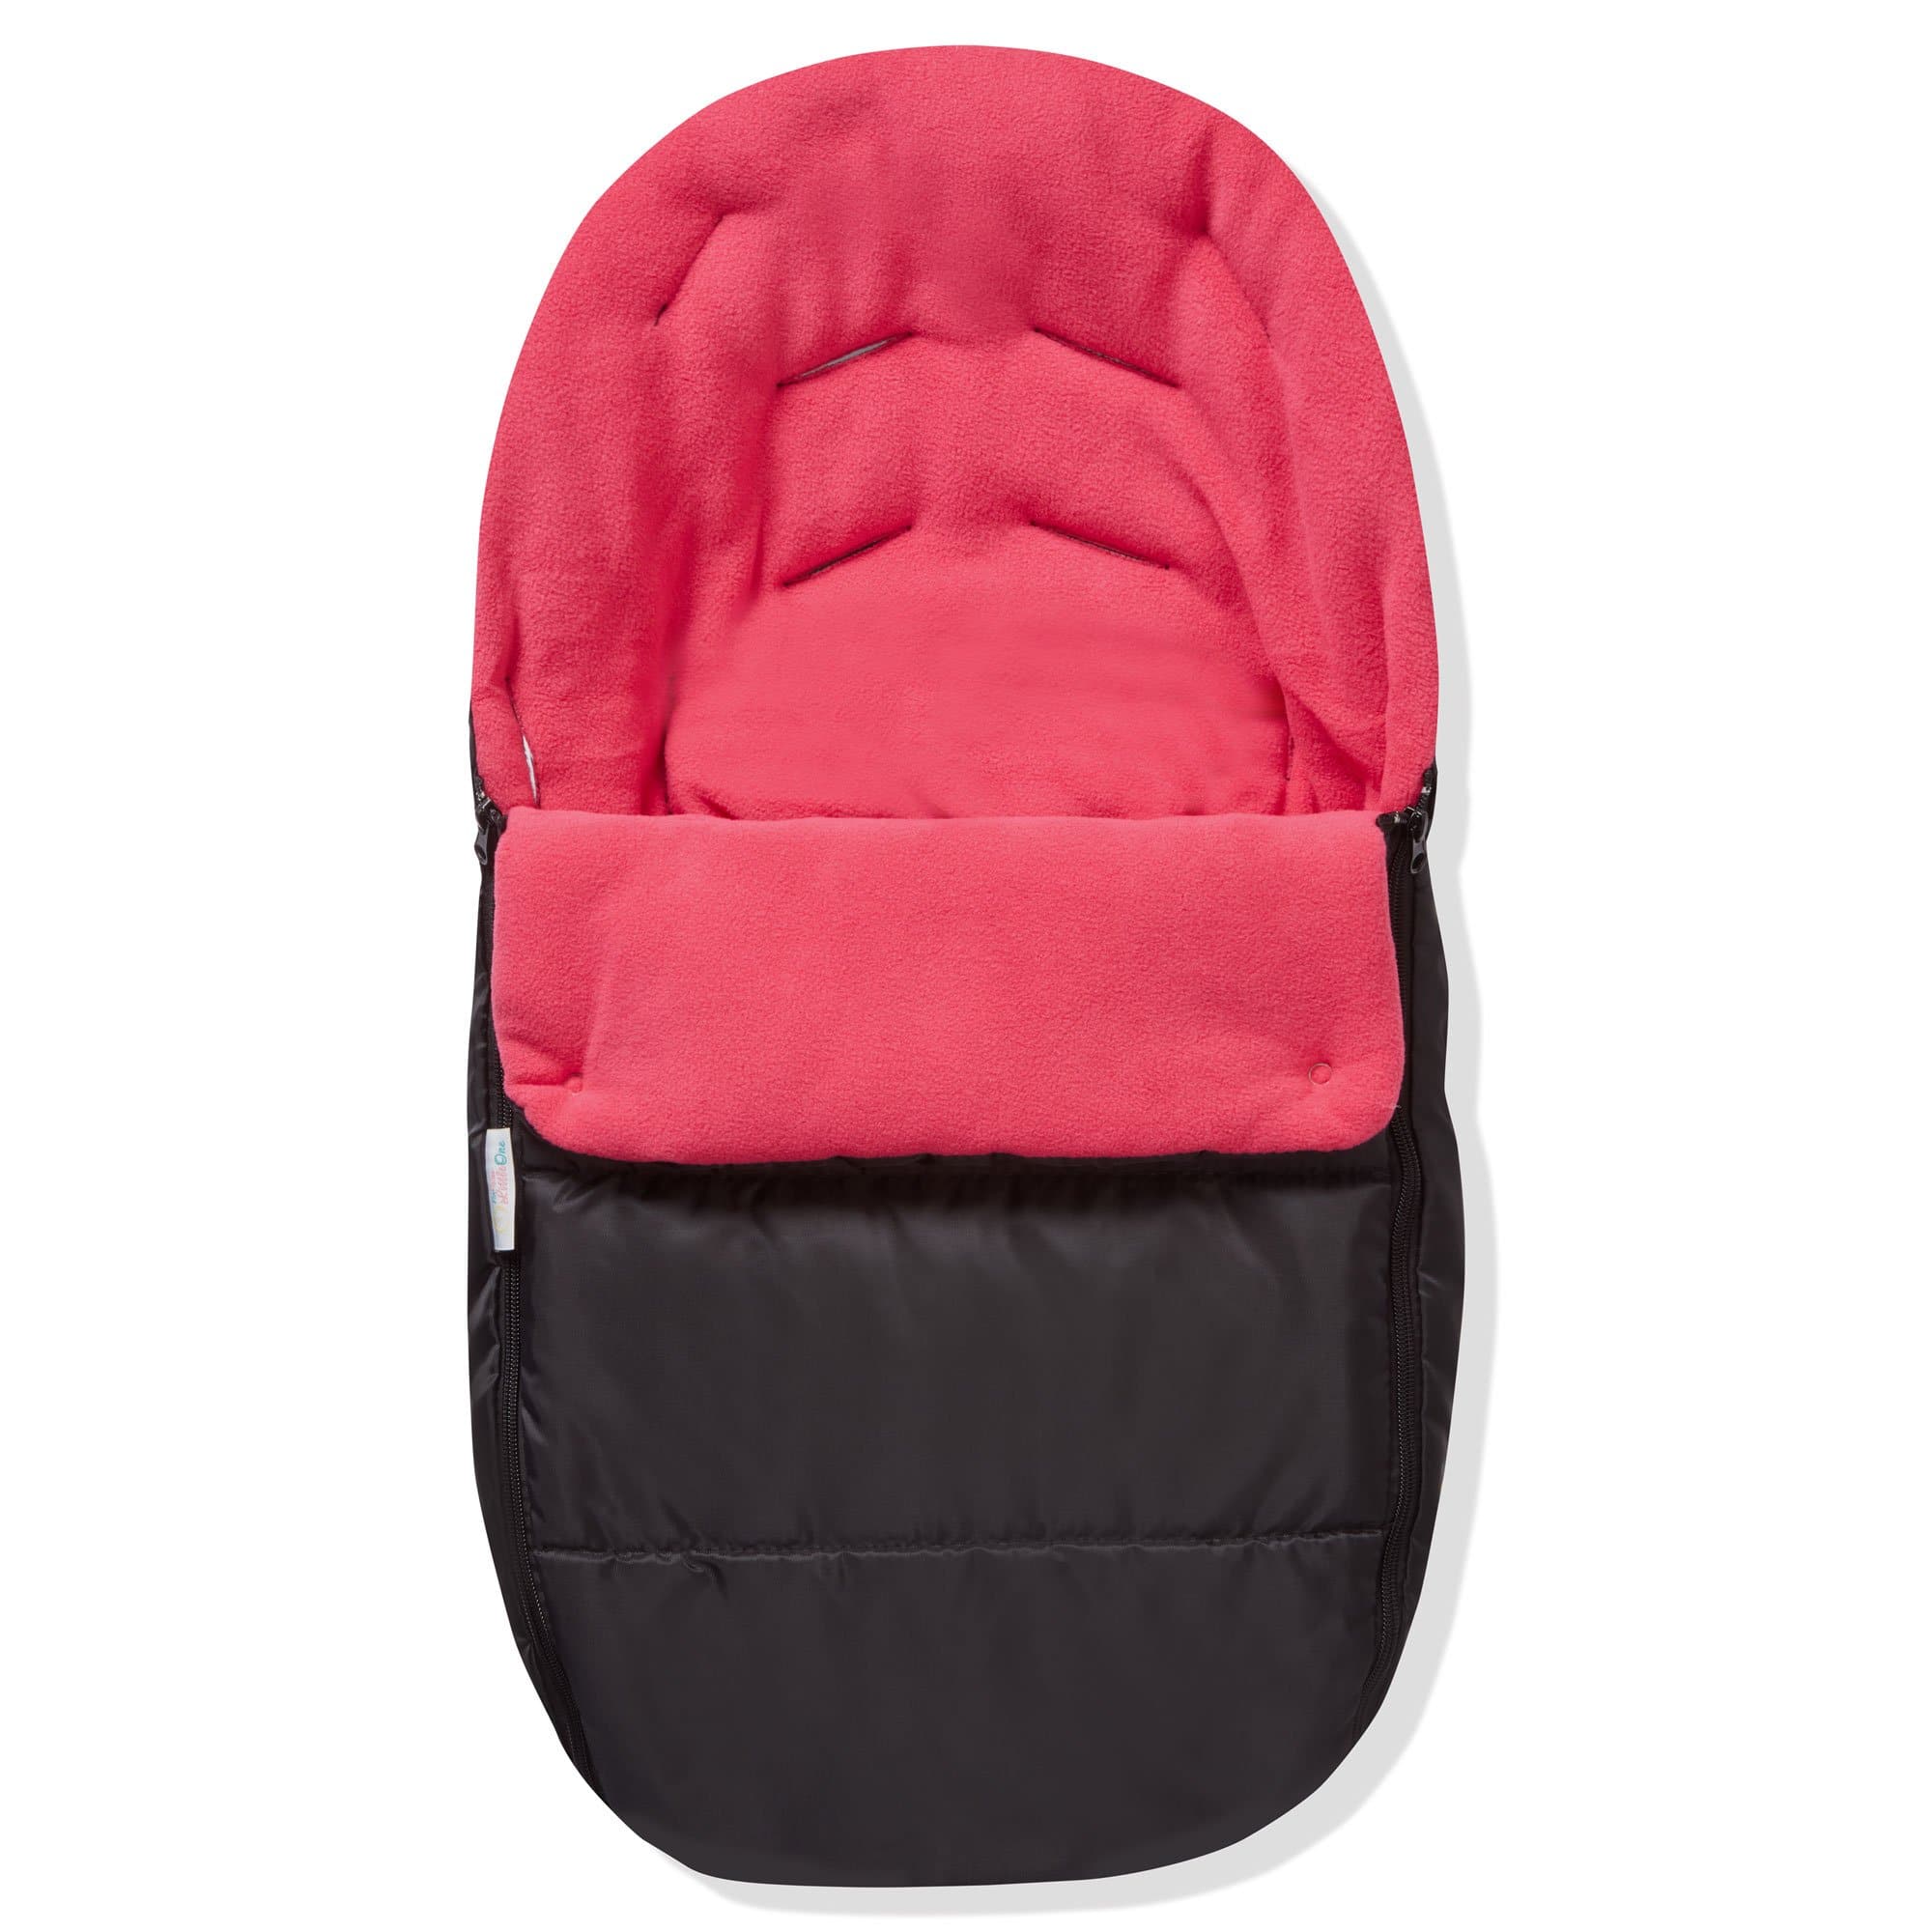 Premium Car Seat Footmuff / Cosy Toes Compatible with Cosatto - Pink Rose / Fits All Models | For Your Little One